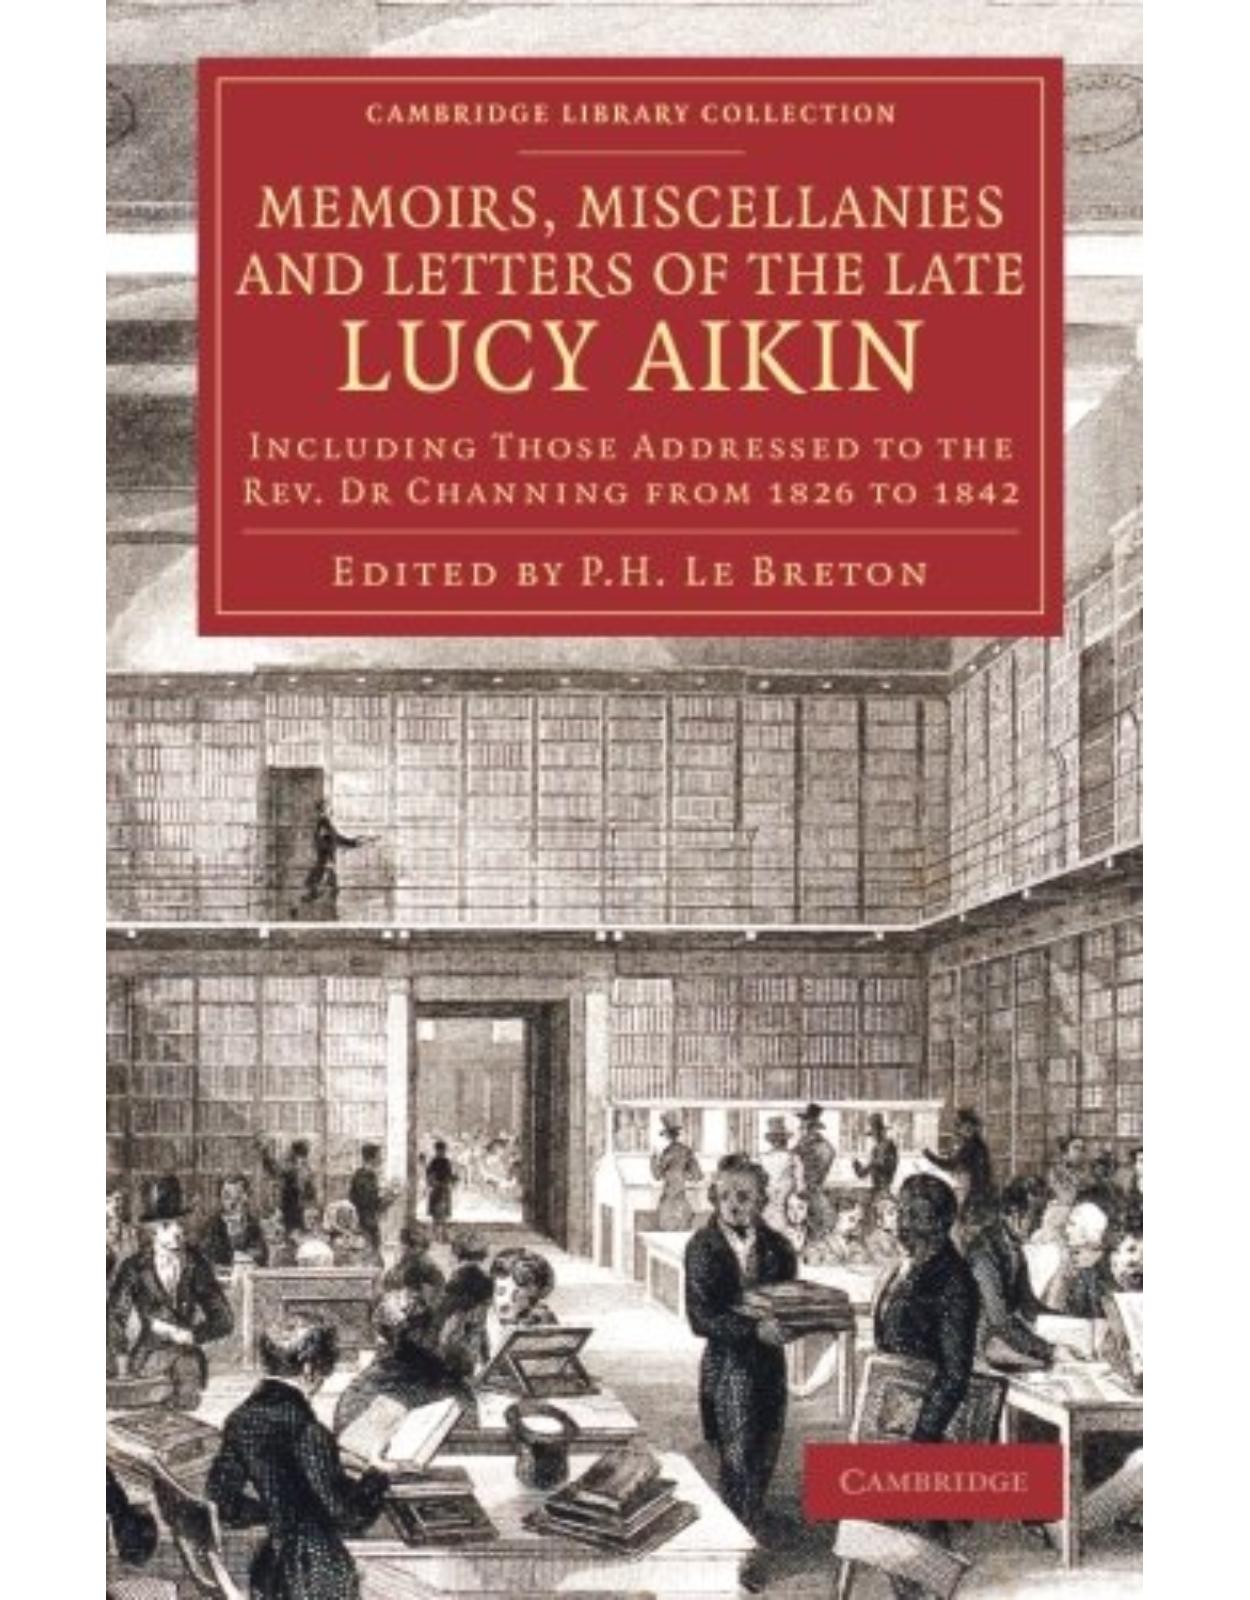 Memoirs, Miscellanies and Letters of the Late Lucy Aikin: Including Those Addressed to the Rev. Dr Channing from 1826 to 1842 (Cambridge Library Collection - Literary Studies)